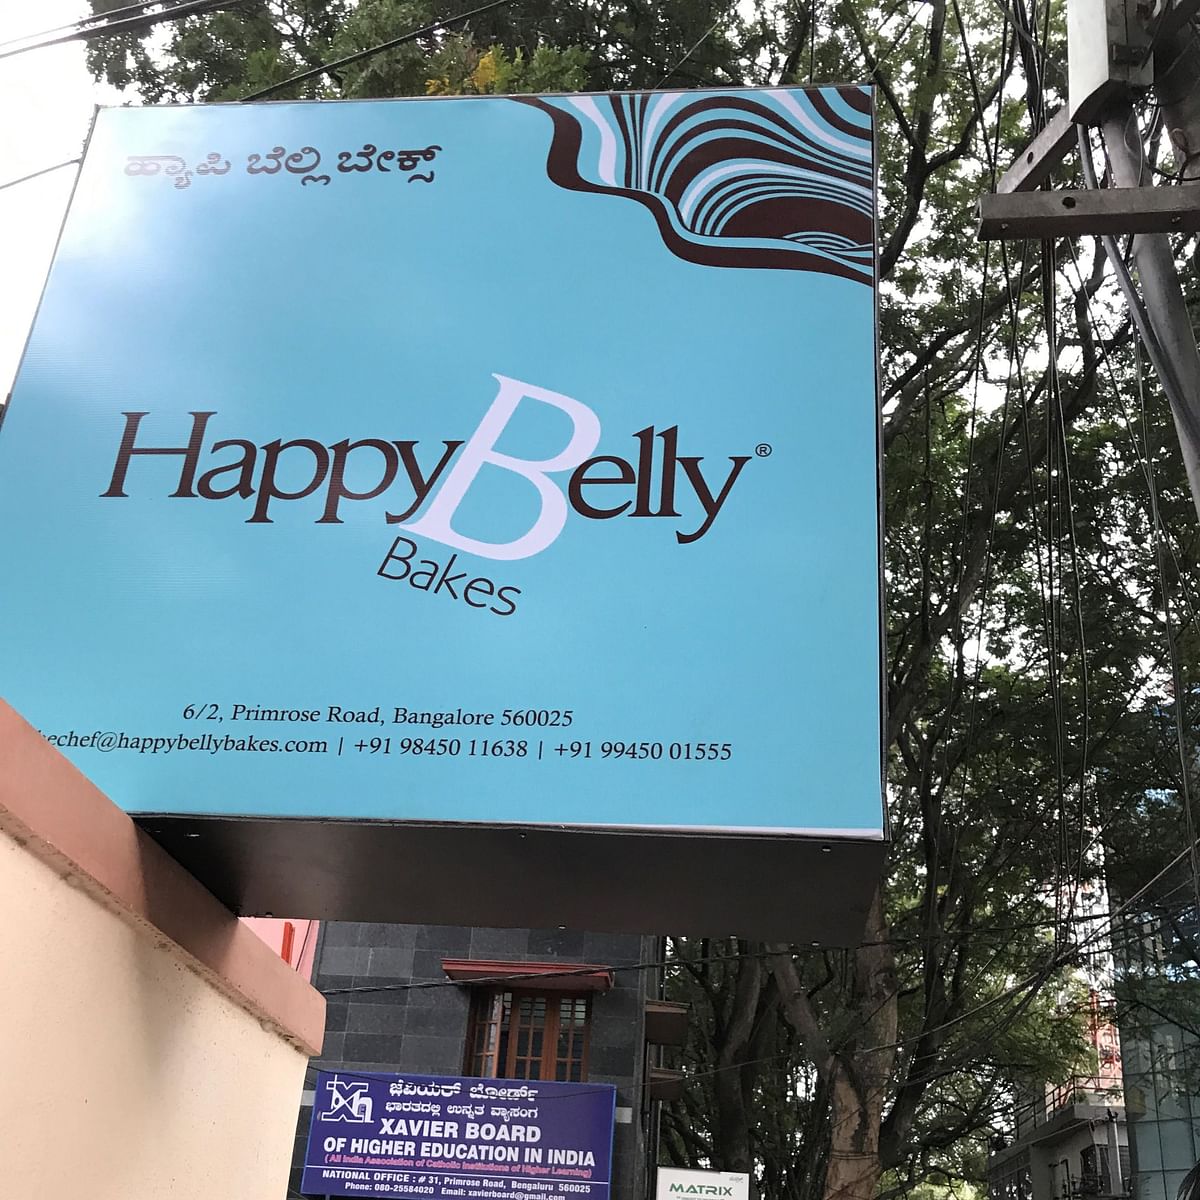 A small bakery in Bengaluru has won a civil suit  against Amazon, and will own the trademark "Happy Belly Bakes."